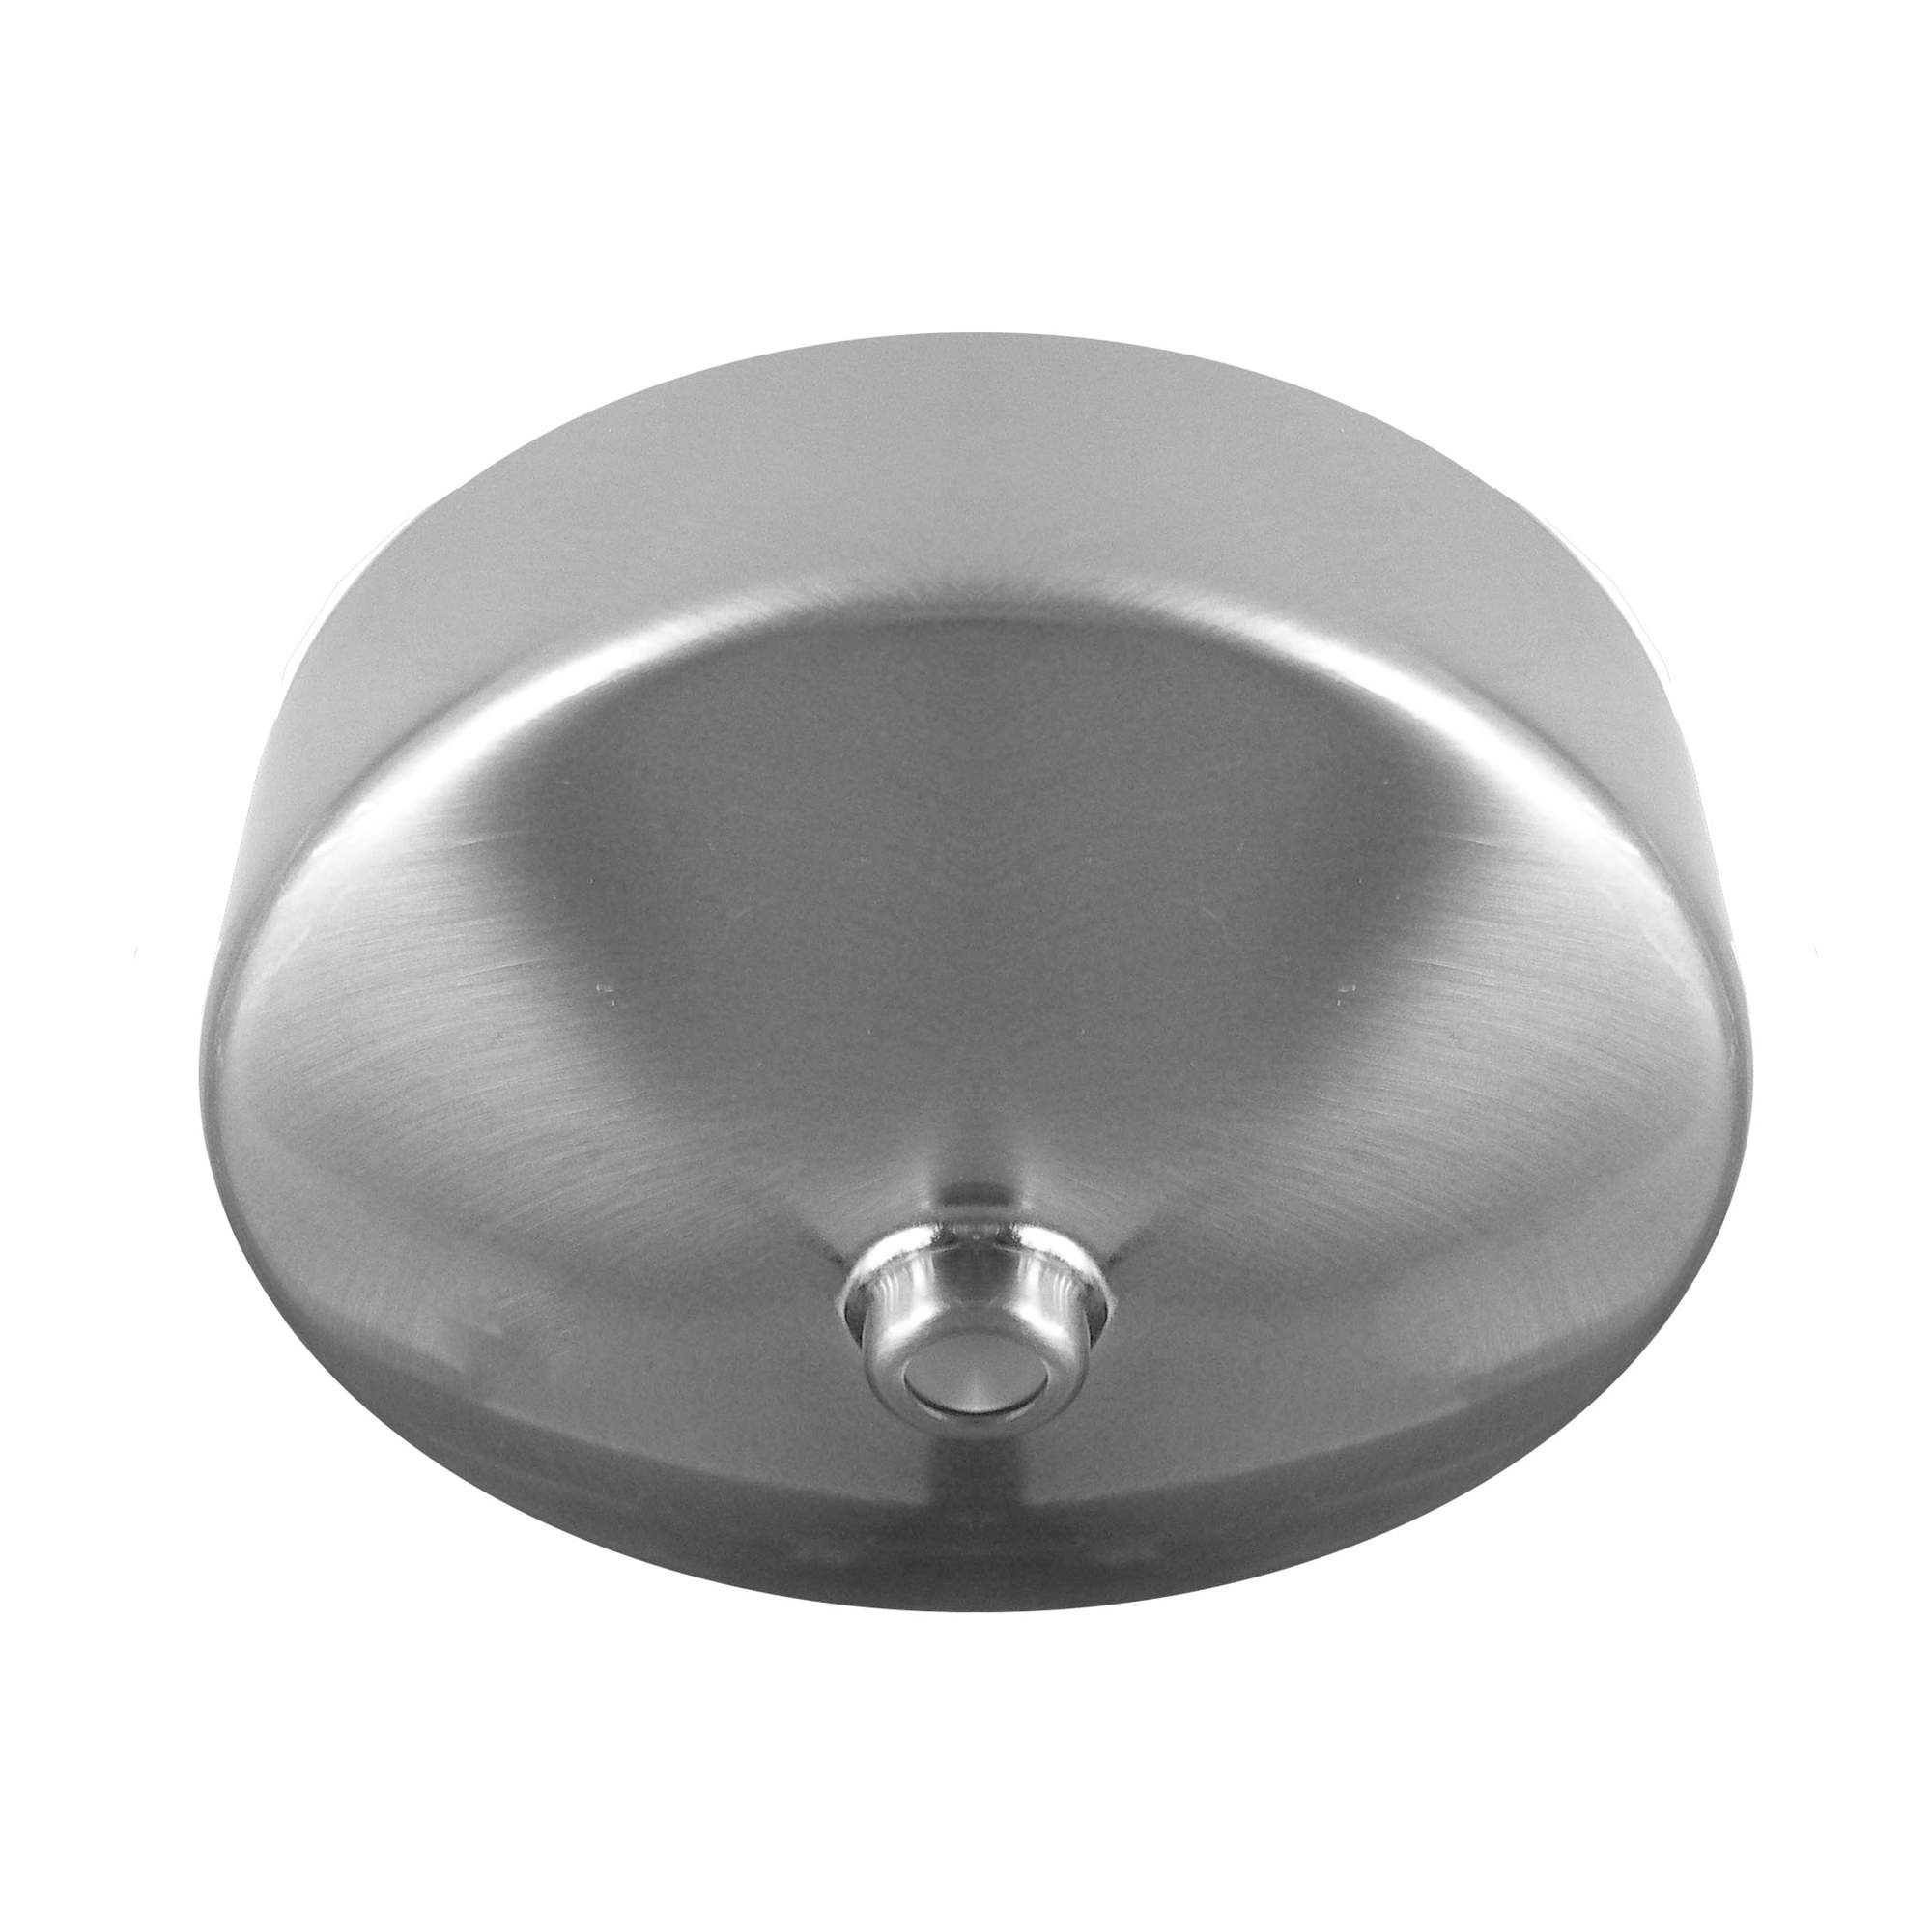 Permalink to Brushed Steel Ceiling Light Fittings